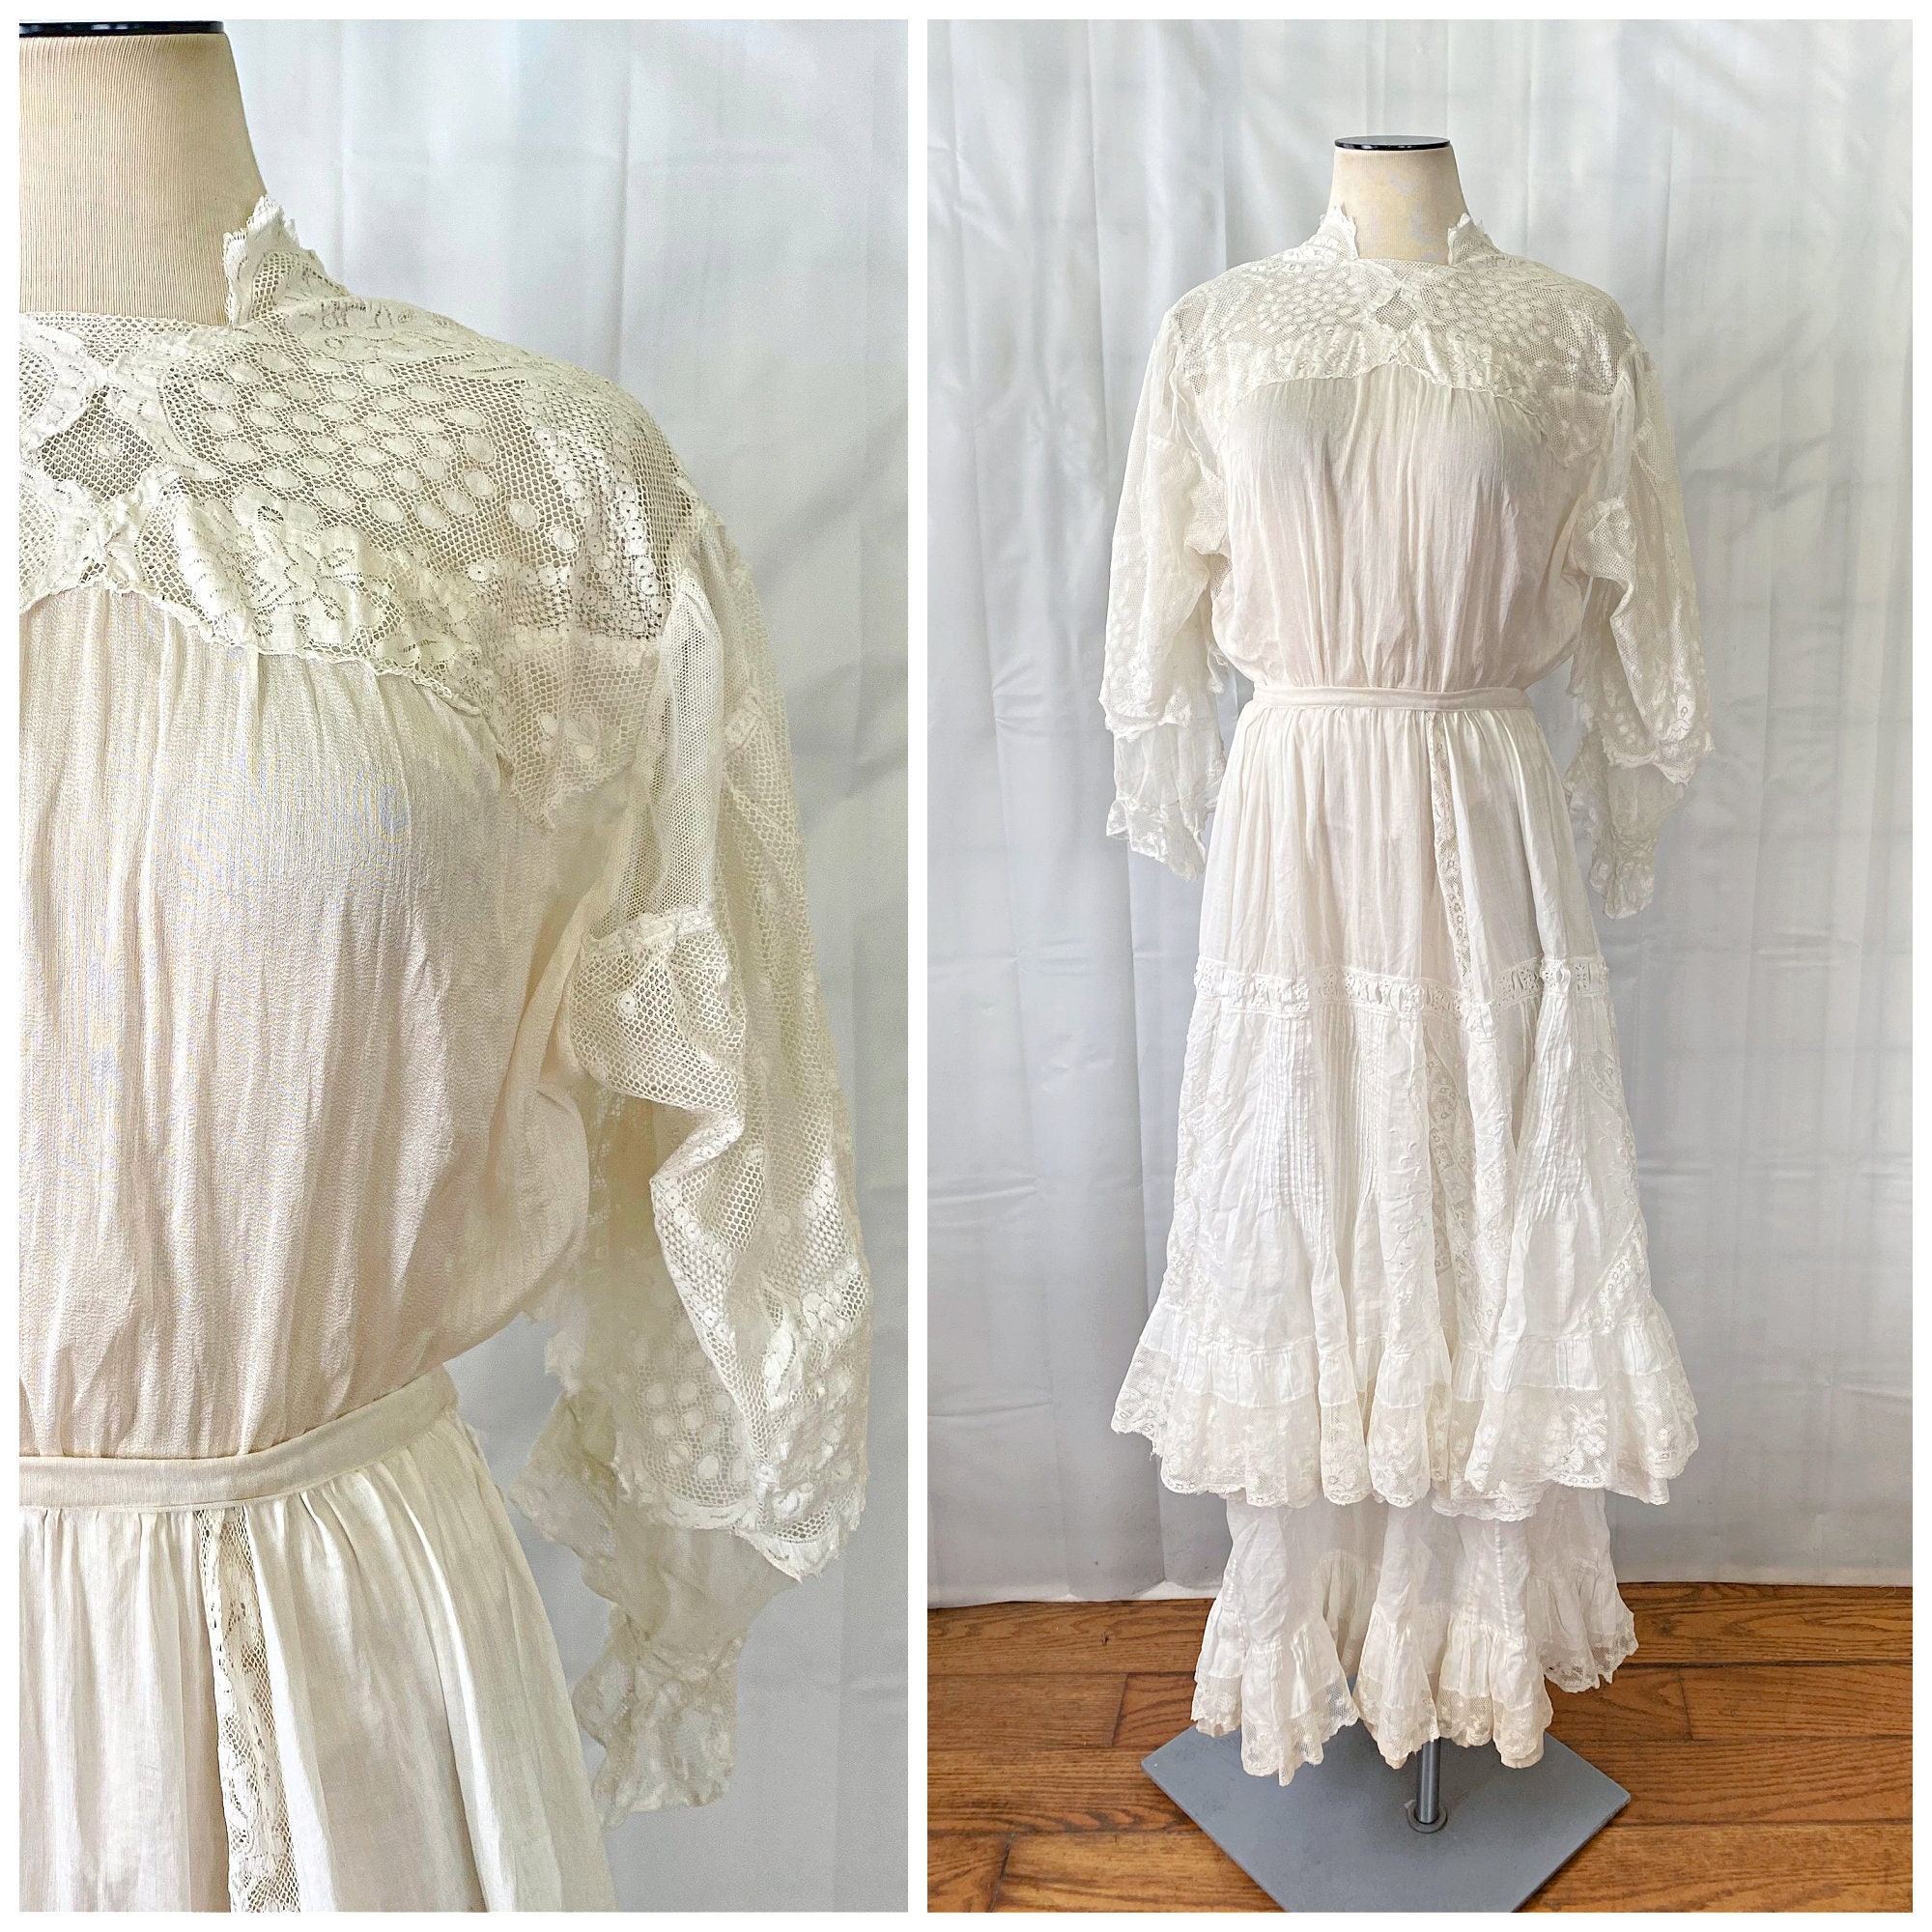 Antique Edwardian Blouse White Cotton Lace Mesh Netting Early 1900s 40 Bust L XL Extra Largethumbnail